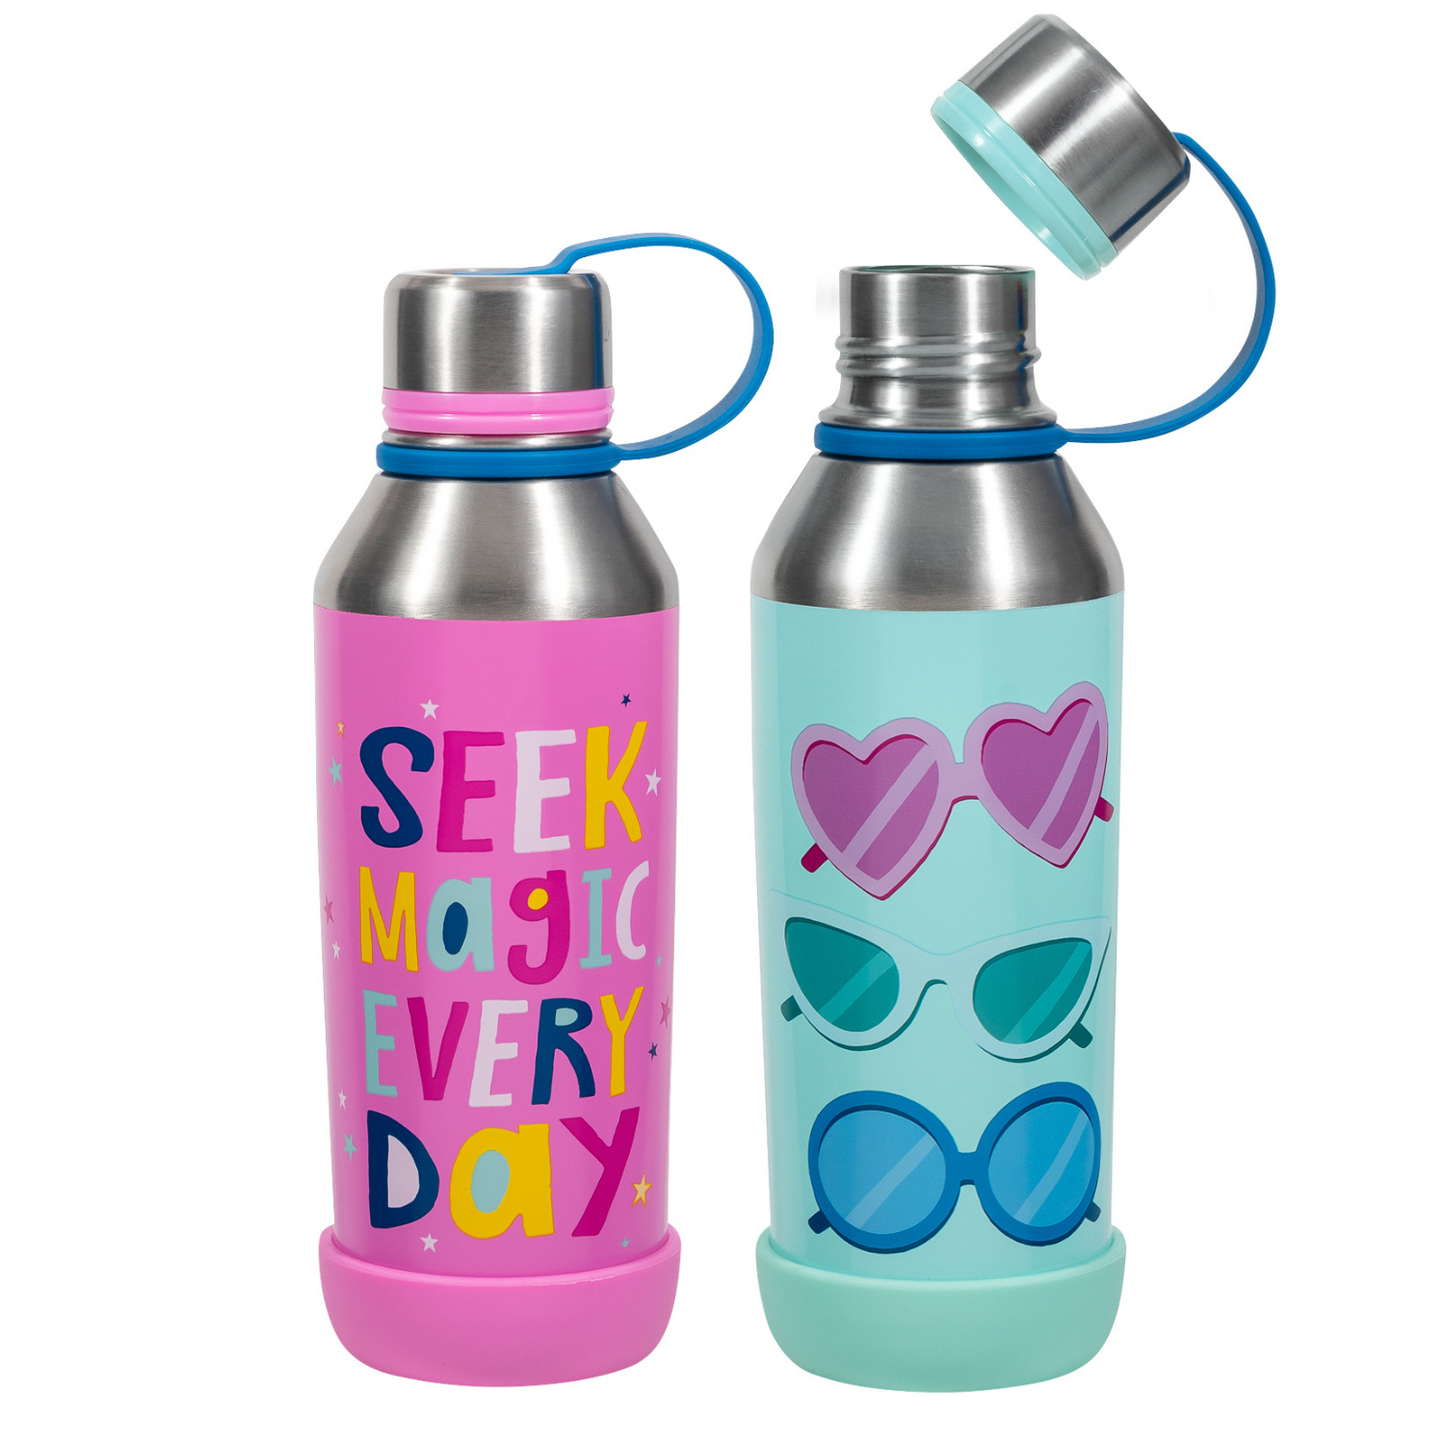 Cool Gear 2-Pack Kids Stainless Steel Double Walled Vacuum Insulated Tyler Bottle, Bumper Included with Threaded Lid Loop, 14 Oz